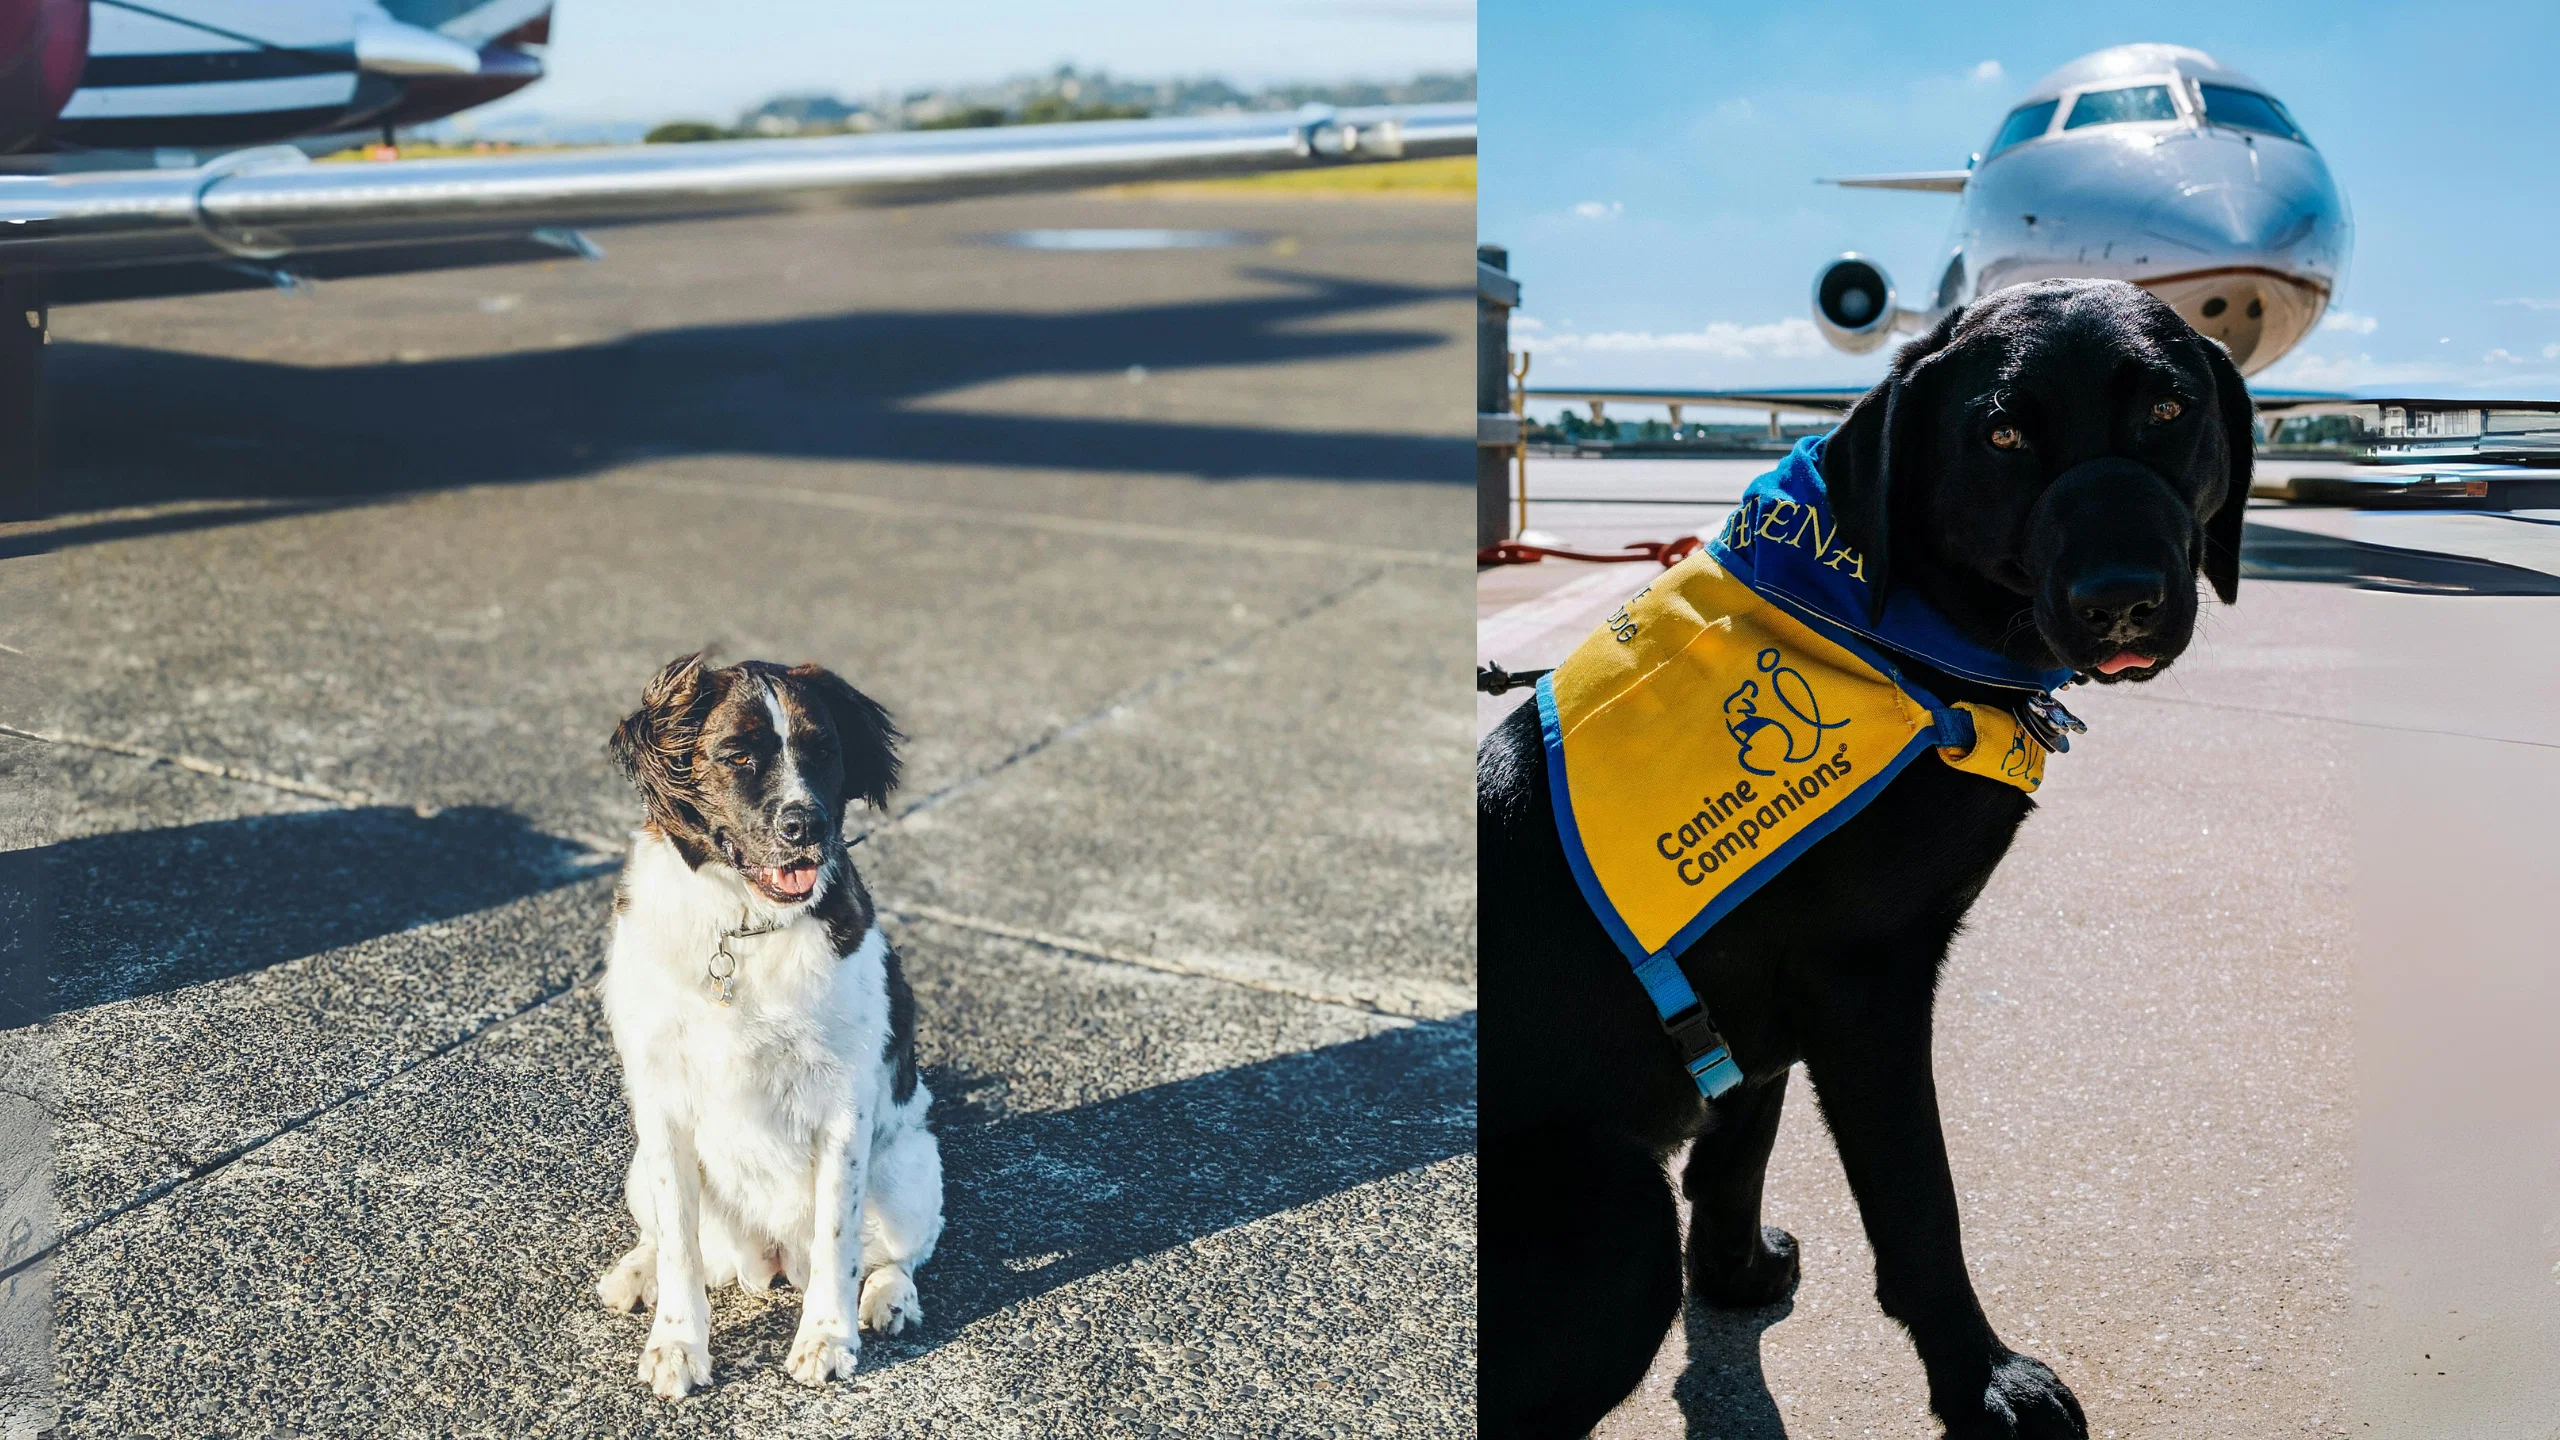 New Dog-Friendly Airline BARK Air Takes Off but Lands in Legal Trouble After First Flight